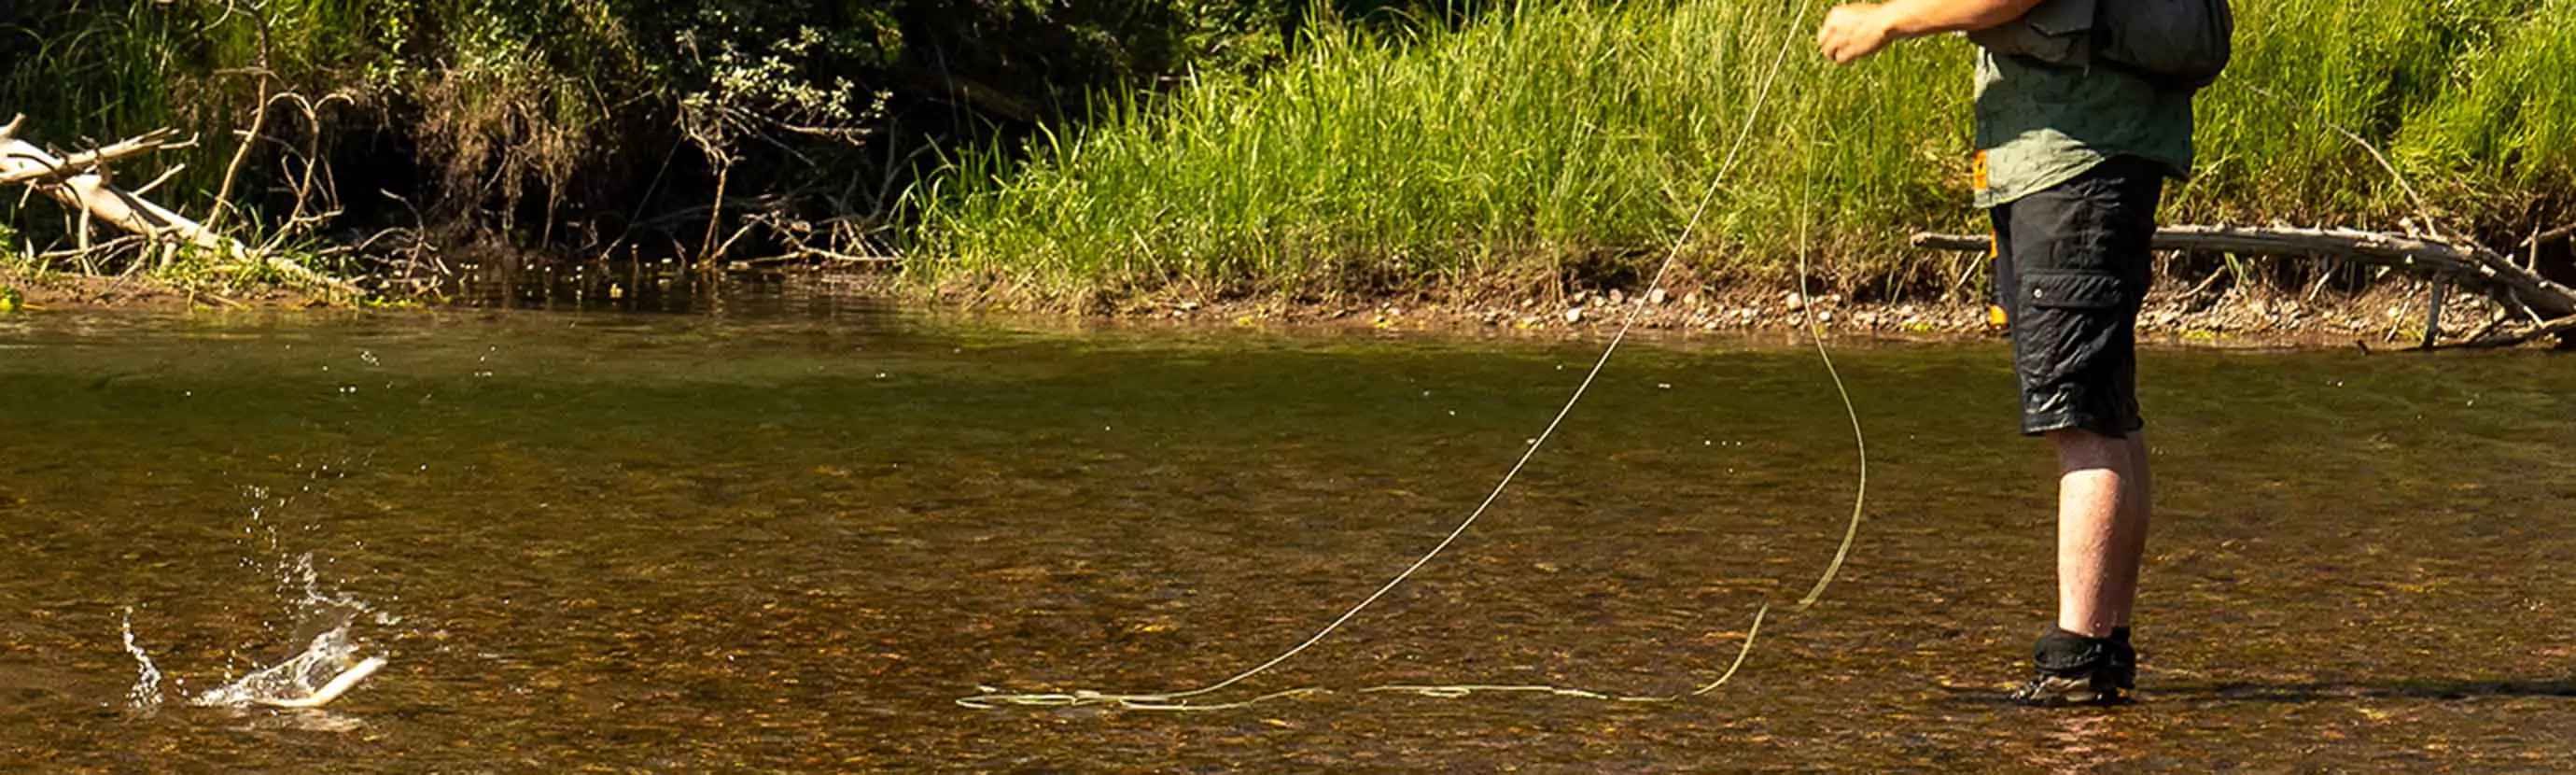 Montana Casting Co.<sup>®</sup> Fly Line - Precision engineered for the perfect cast.